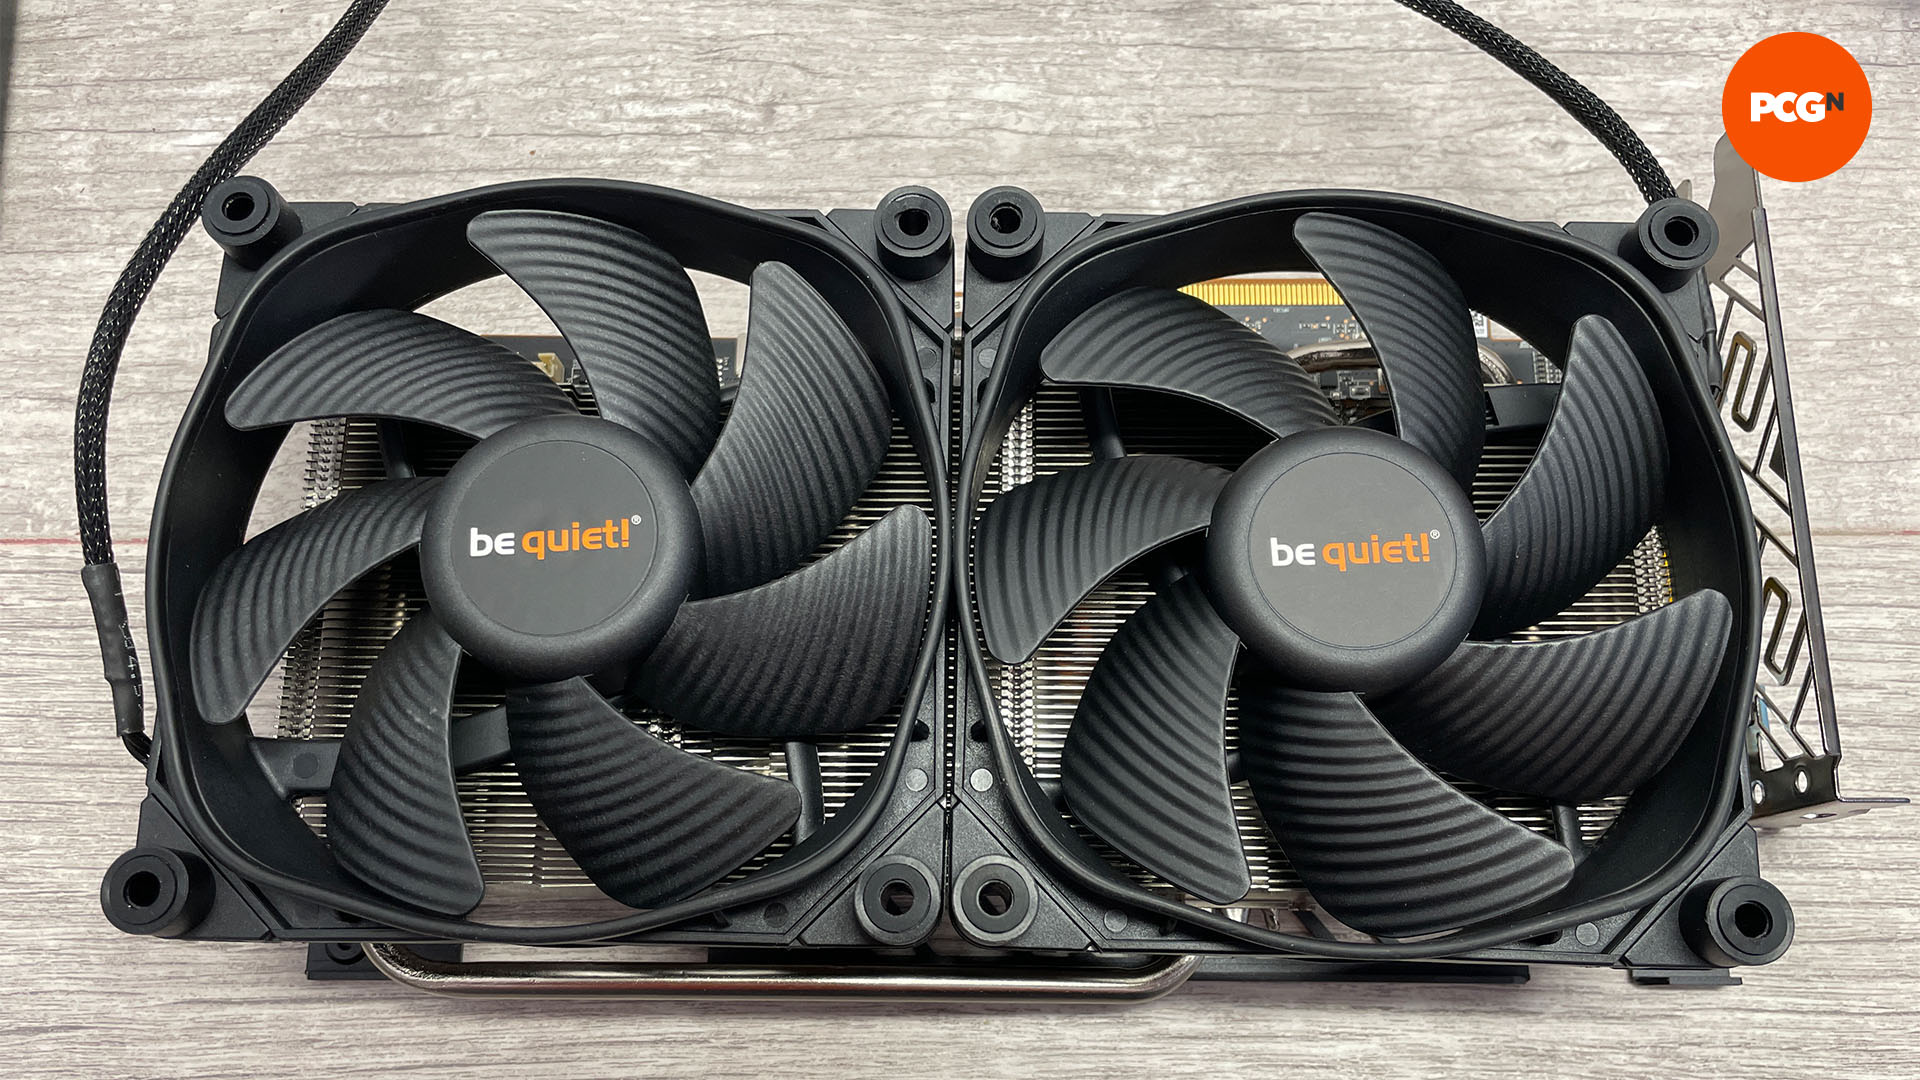 How to lower GPU temp: be quiet! 120mm case fans on a graphics card heatsink